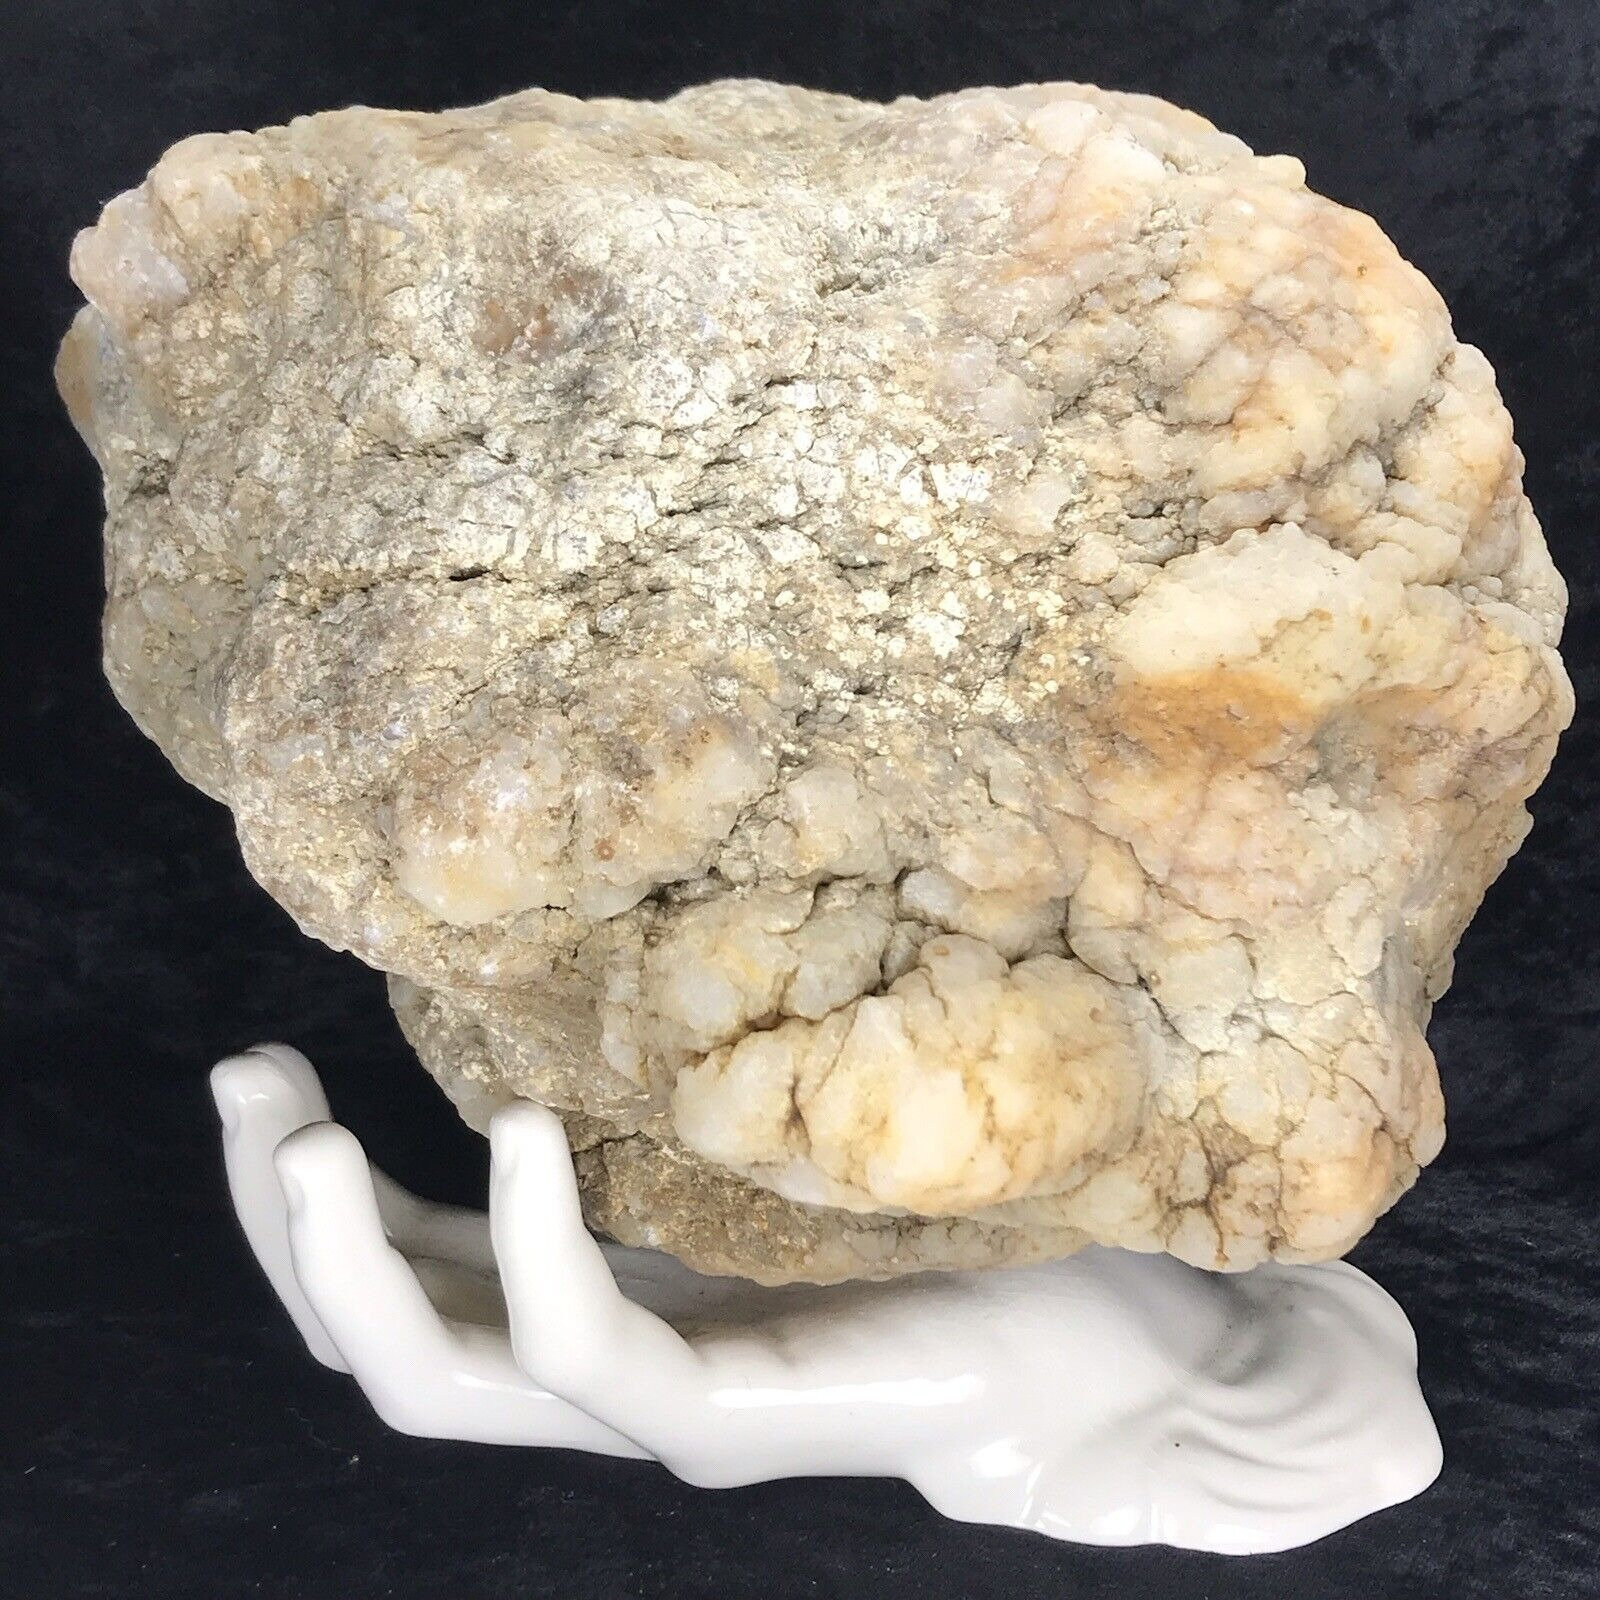 Testing out our - Lida Asteria Kentucky Geode Rock Shop